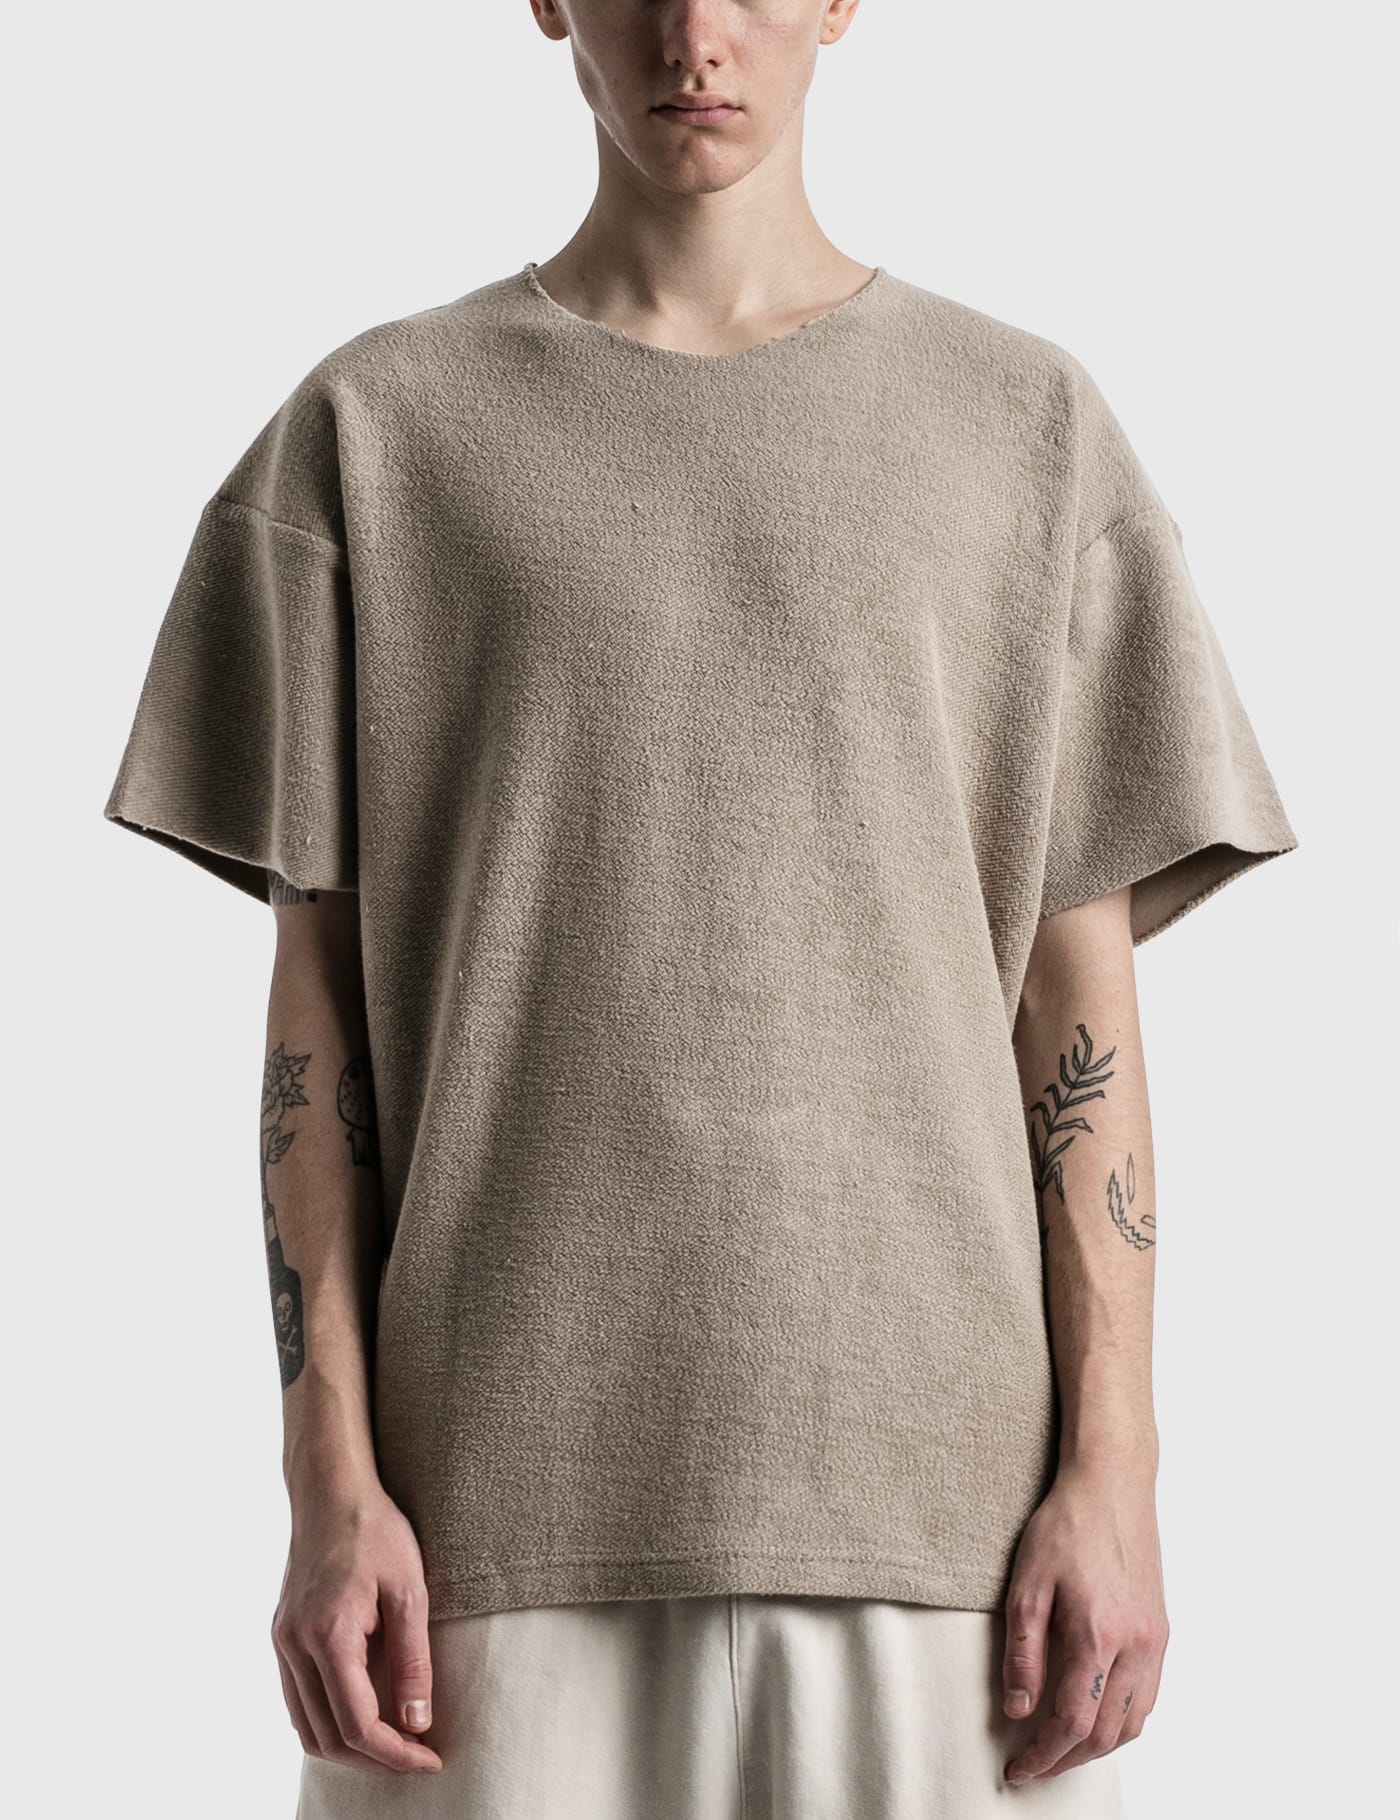 Tシャツ/カットソー(半袖/袖なし)FEAR OF GOD inside out tee ｲﾝｻｲﾄﾞｱｳﾄTｼｬﾂ